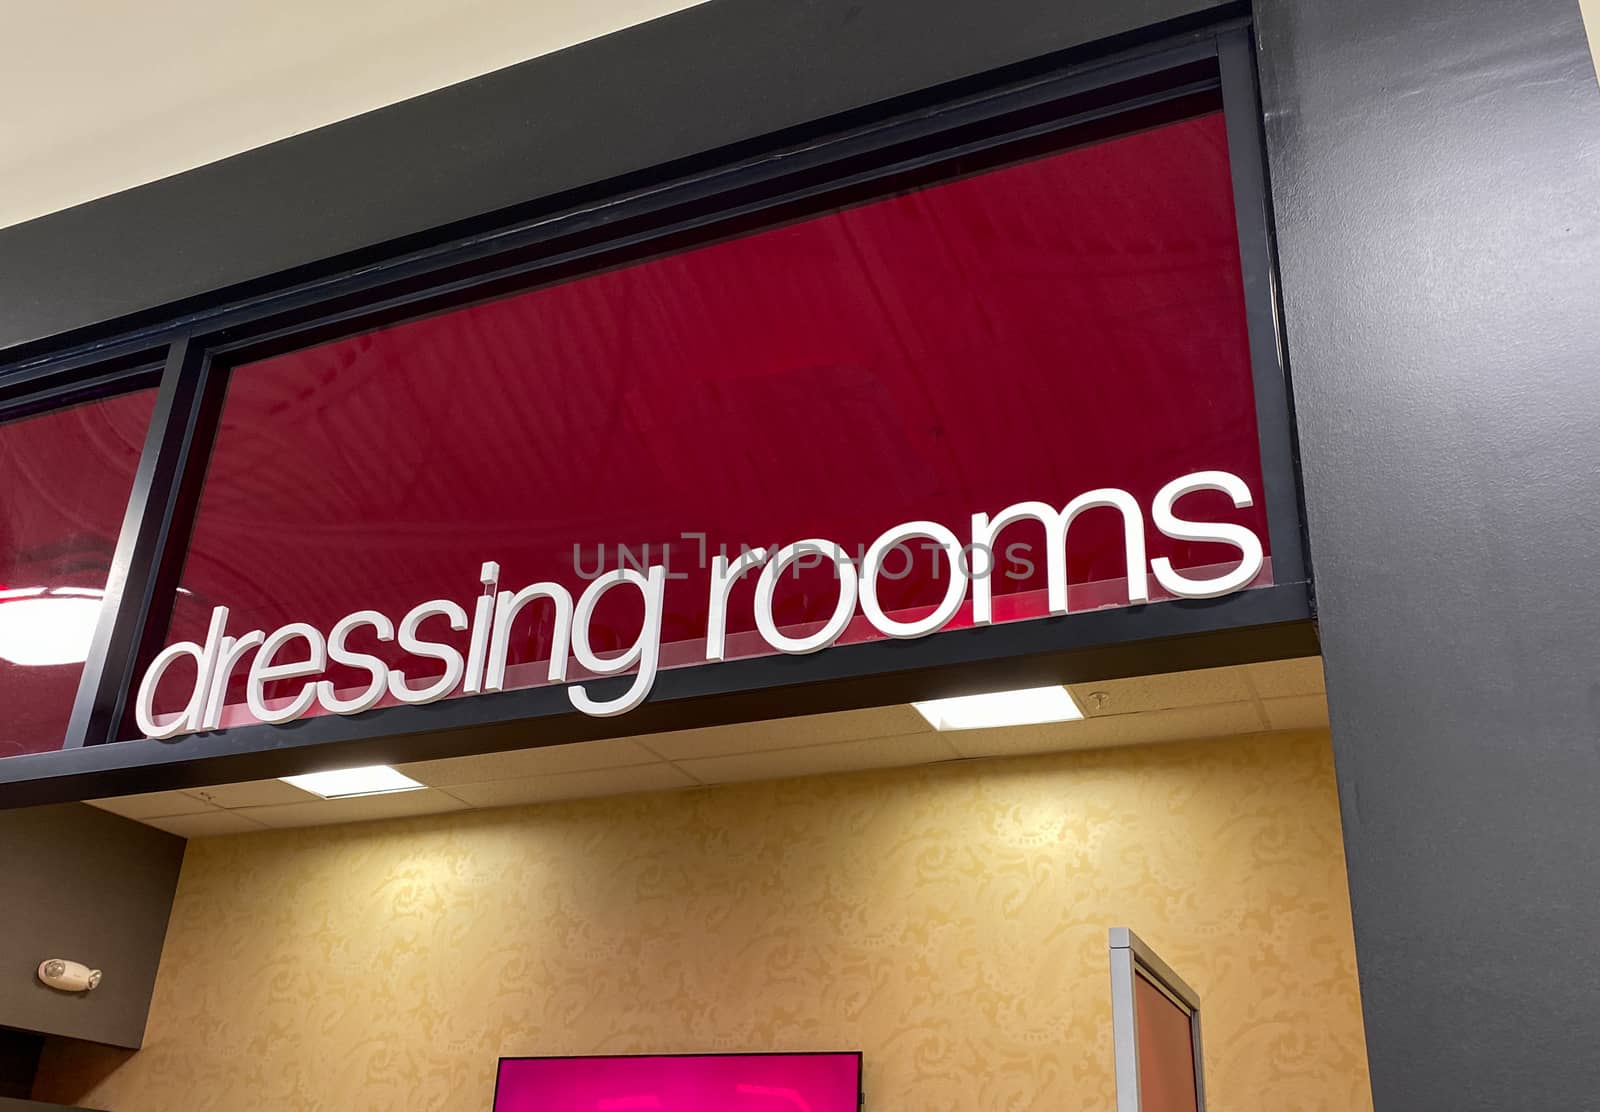 The dressing room sign by Jshanebutt